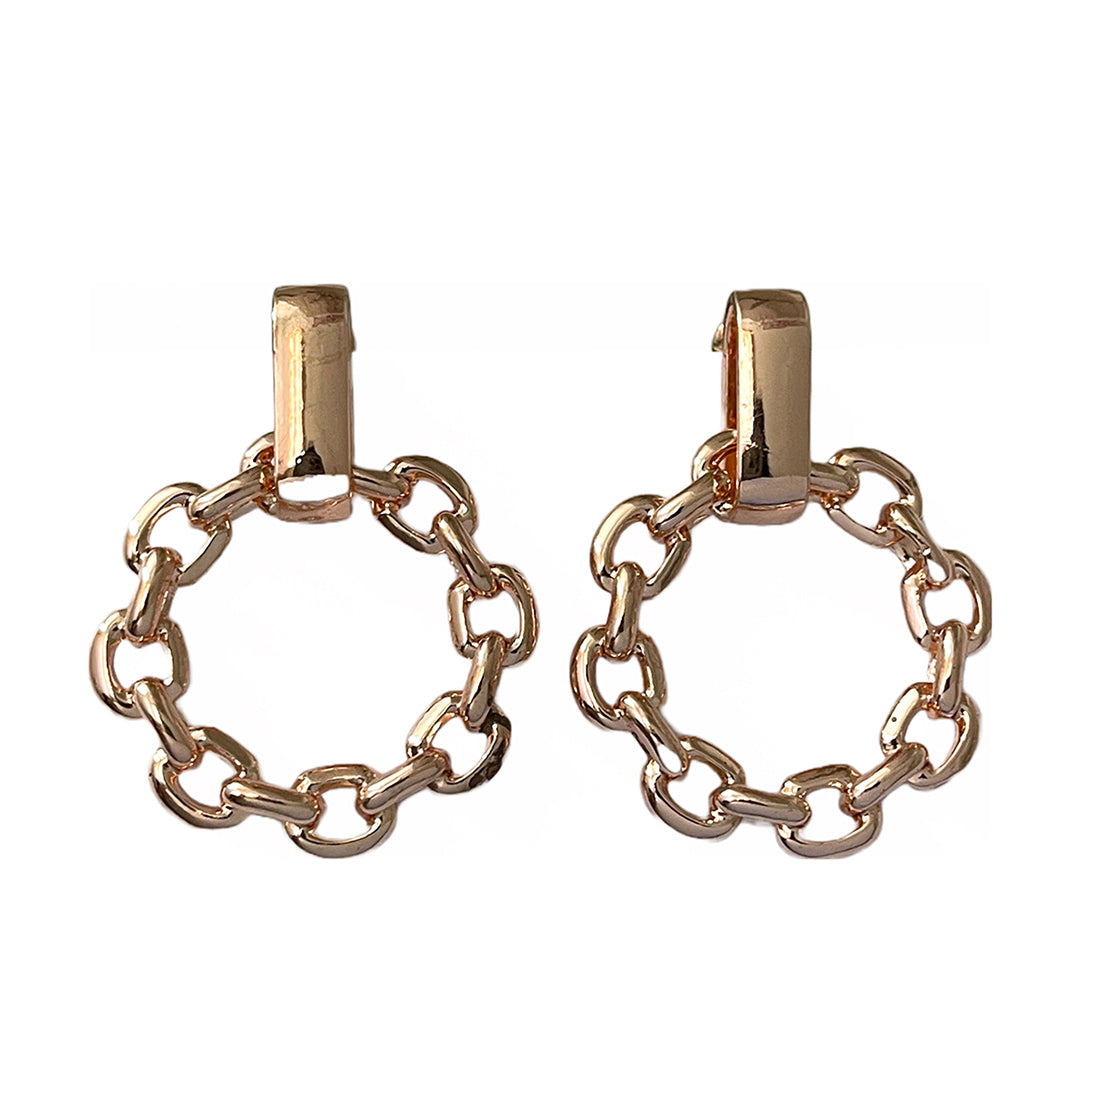 STATEMENT CHAIN-LINK ROSE GOLD-TONED CIRCULAR DROP EARRINGS